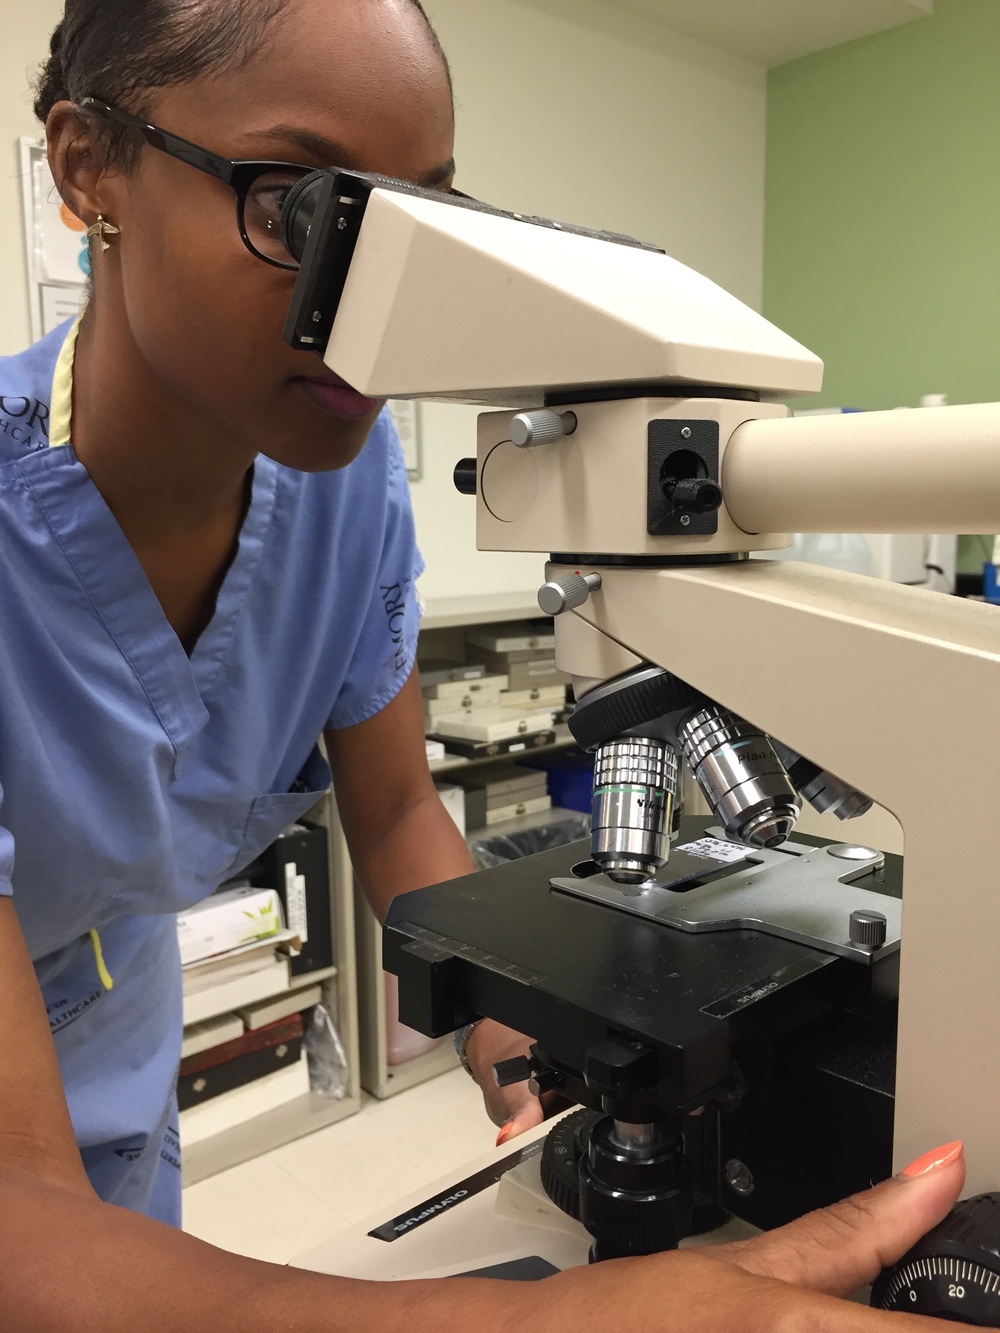 Spotlight: Histologist aims at providing best experience possible for Veterans